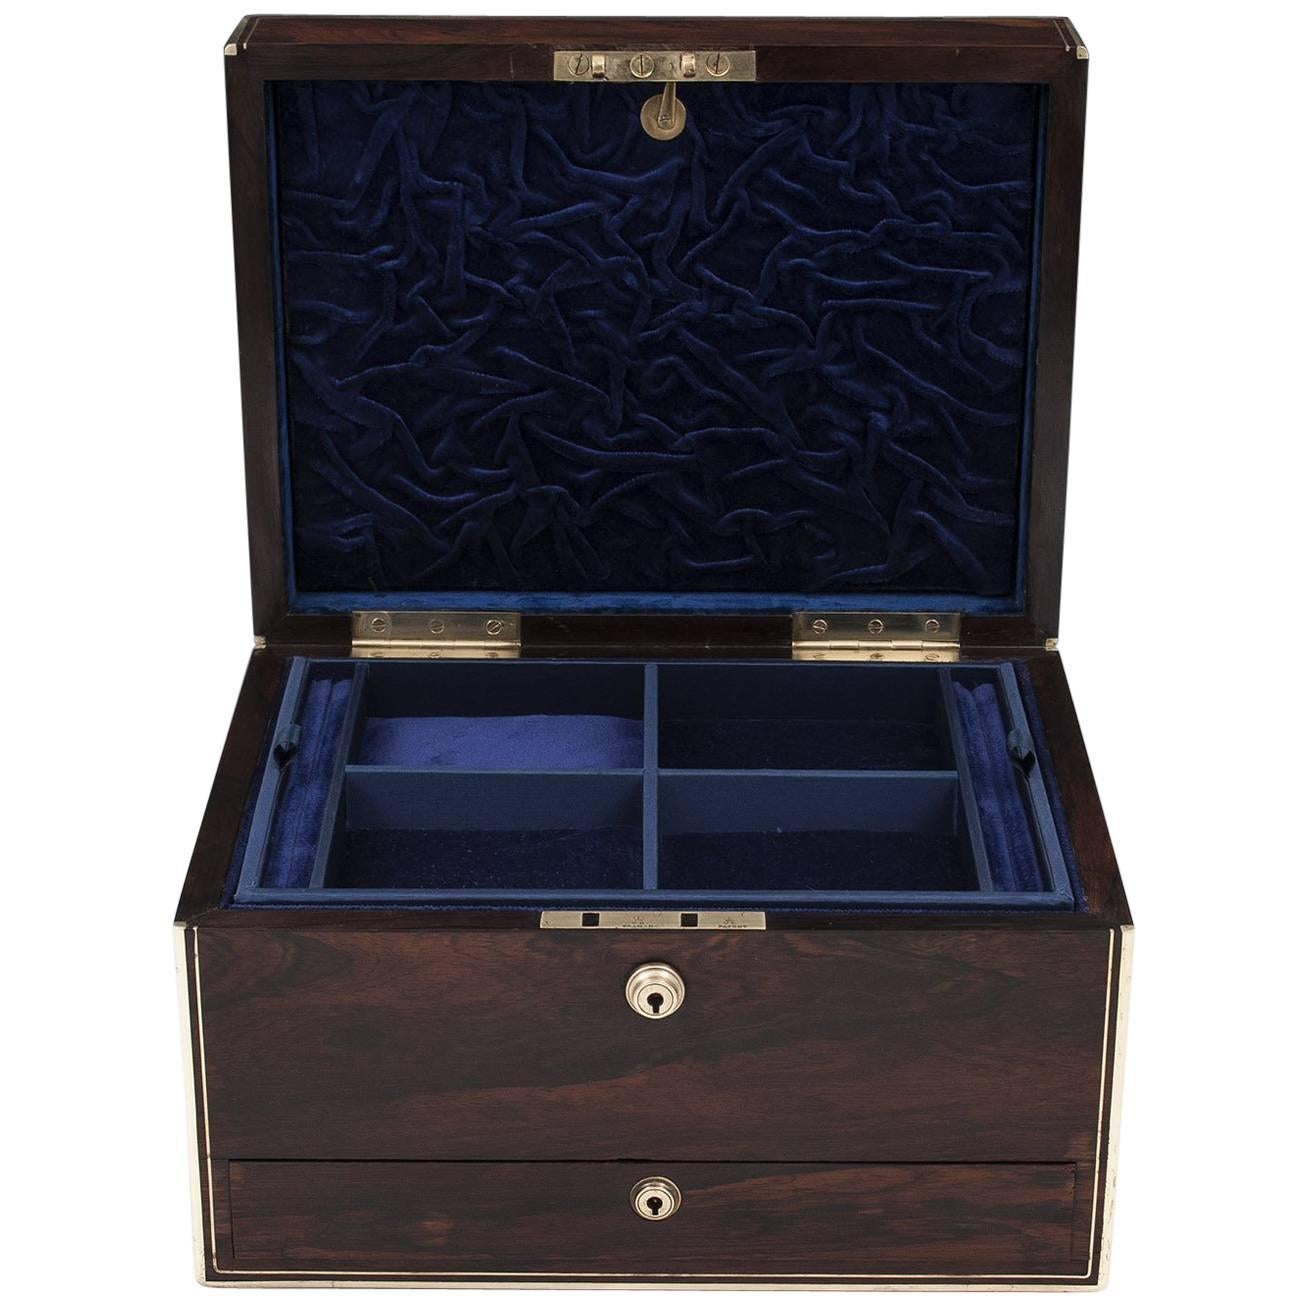 Rosewood Brass Bound Jewelry Box with Campaign Carry Handles, 19th Century